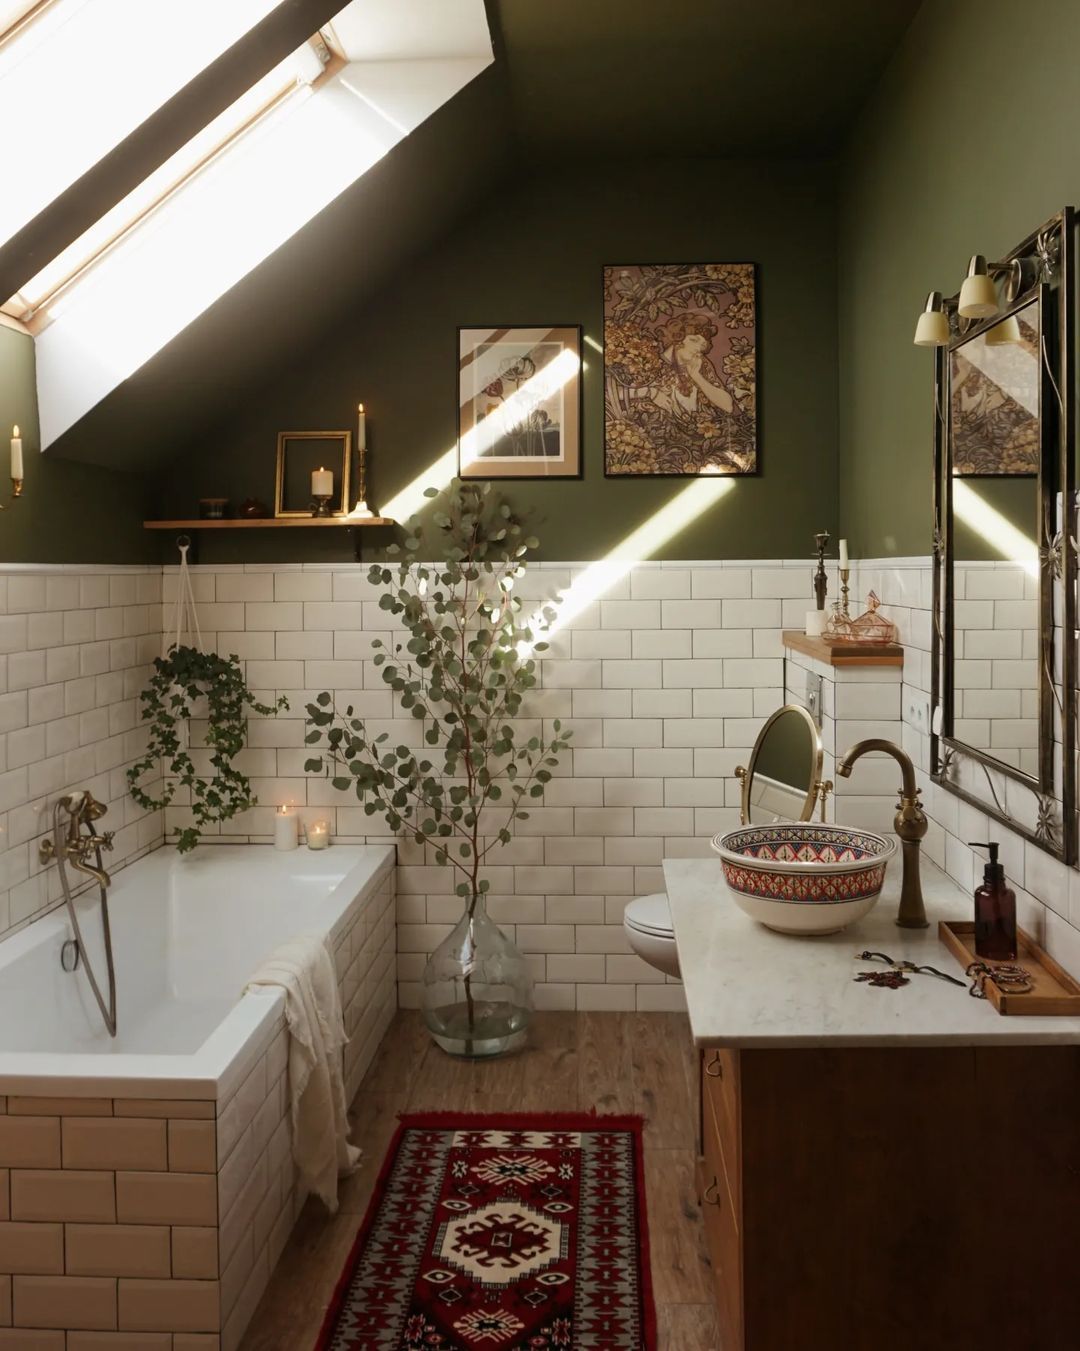 The Ultimate Guide to Choosing the
Perfect Corner Bathroom Cabinet